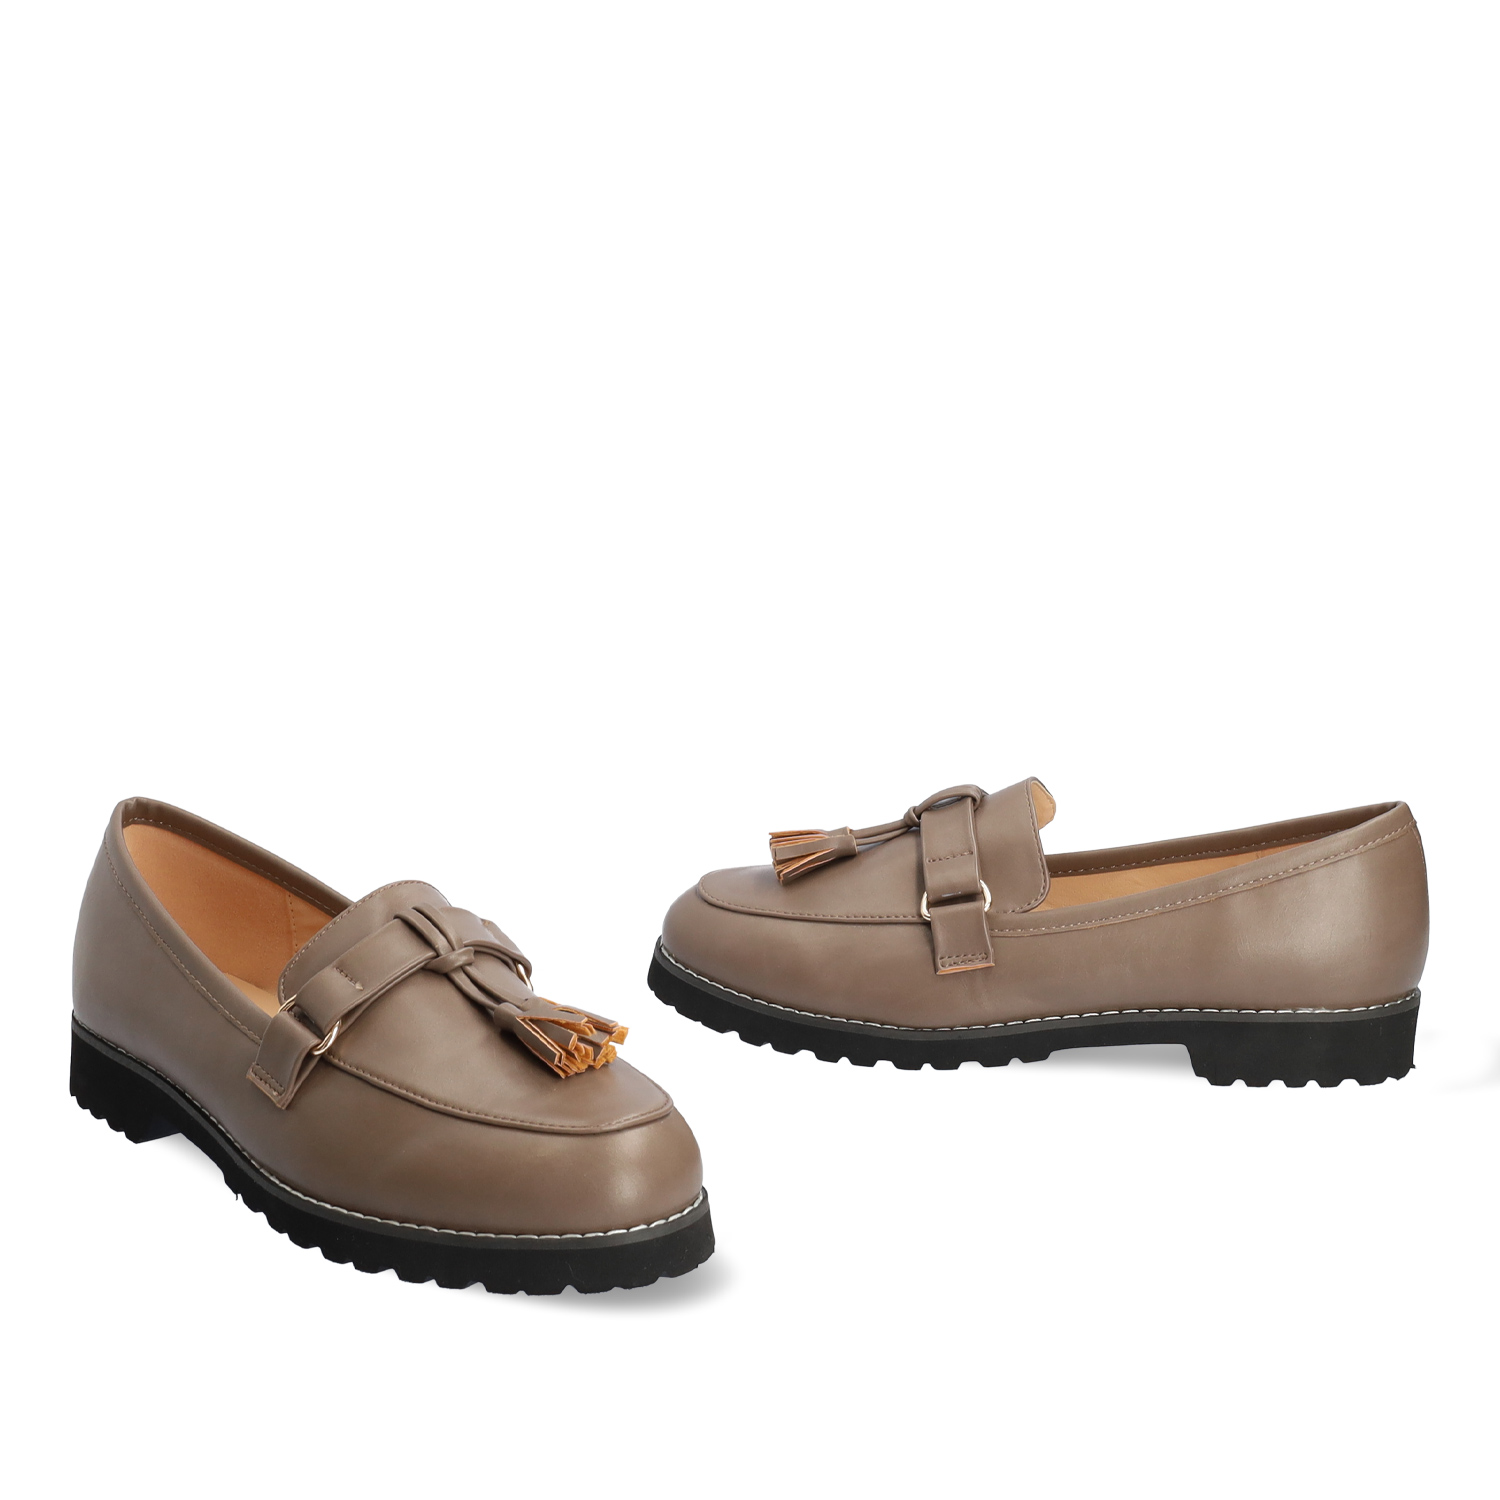 Moccasins in light brown faux leather and tassle 